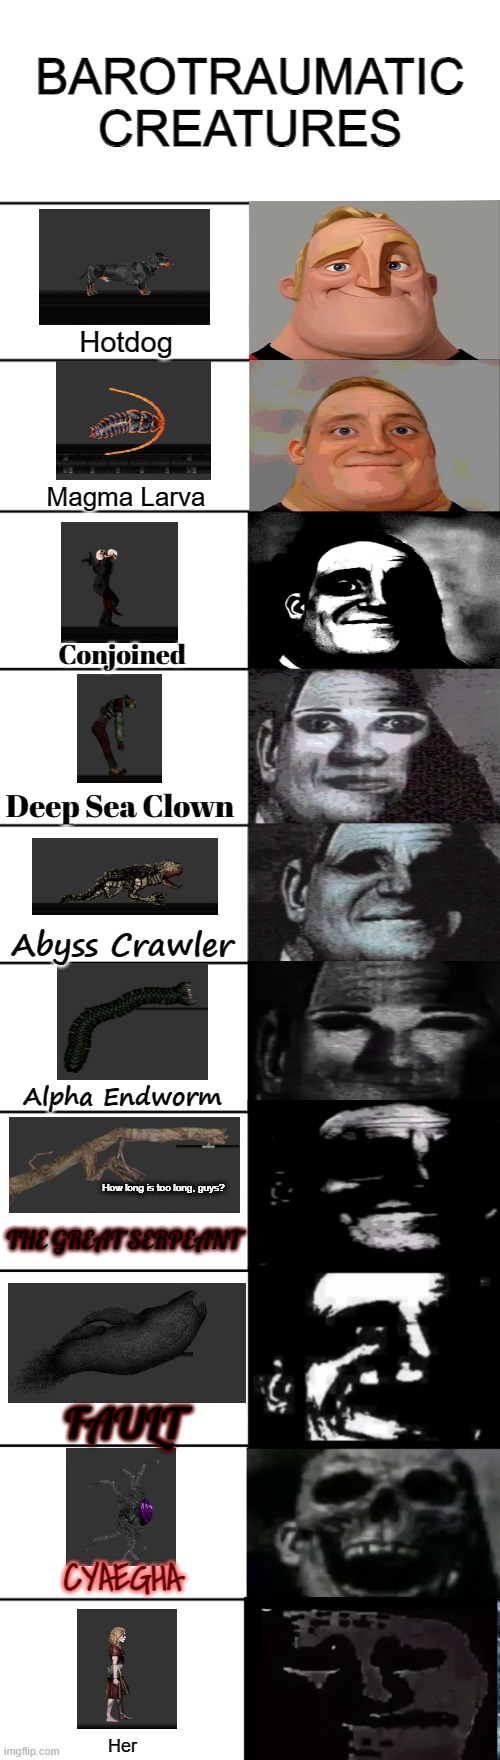 Sums up barotraumatic | BAROTRAUMATIC CREATURES; Hotdog; Magma Larva; Conjoined; Deep Sea Clown; Abyss Crawler; Alpha Endworm; How long is too long, guys? THE GREAT SERPEANT; FAULT; CYAEGHA; Her | image tagged in mr incredible becoming uncanny,barotrauma,terror,demon,clowns,traumatized mr incredible | made w/ Imgflip meme maker